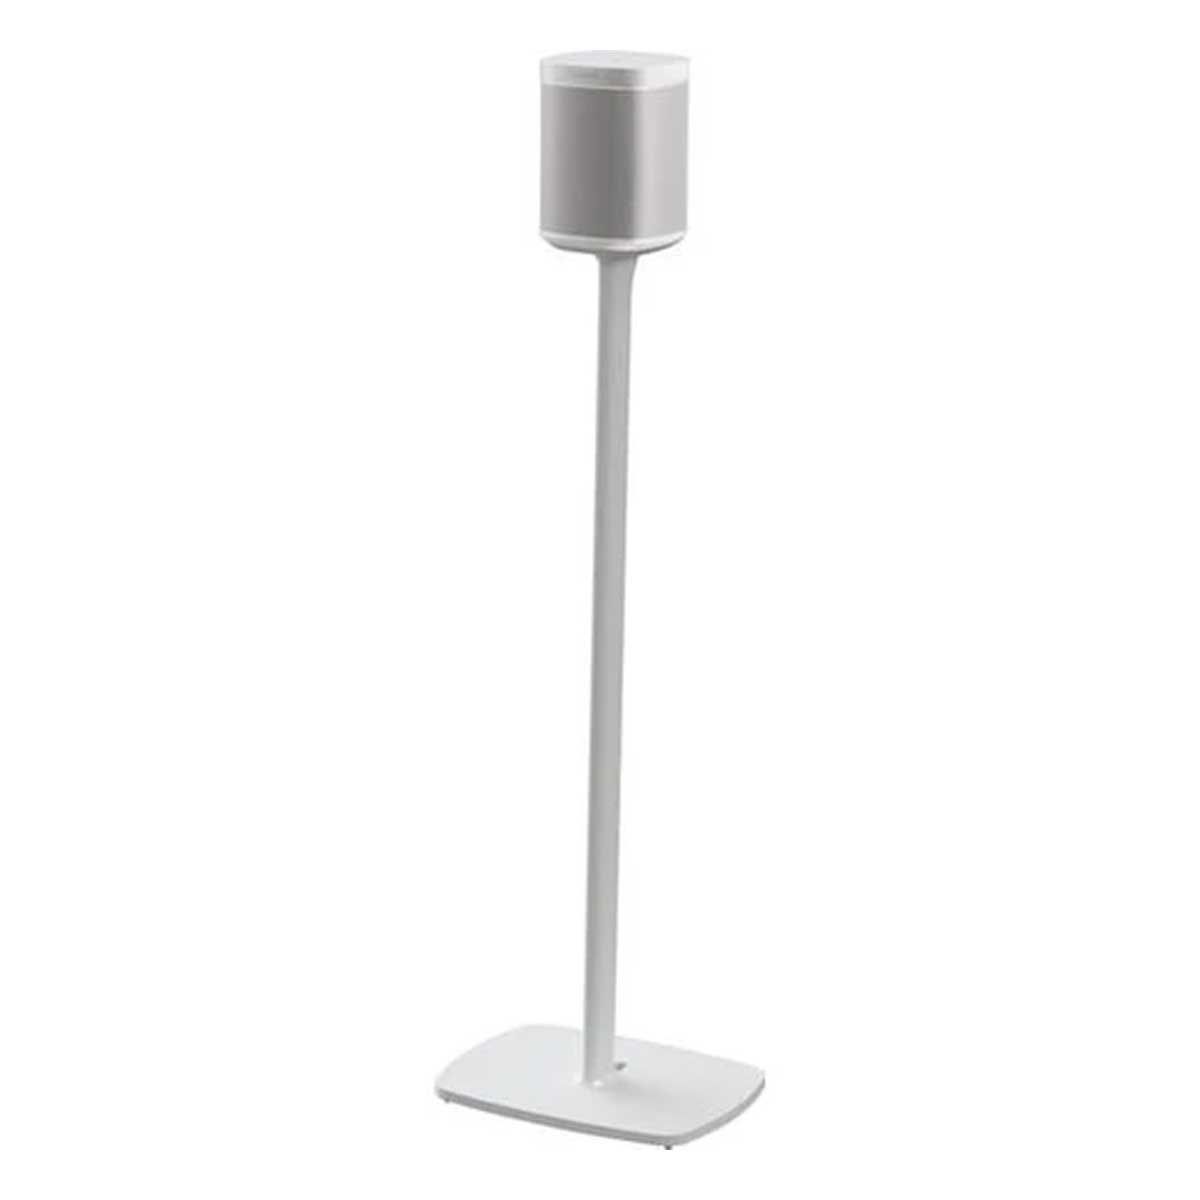 FLEXSON FLOOR STAND FOR SONOS ONE OR PLAY:1